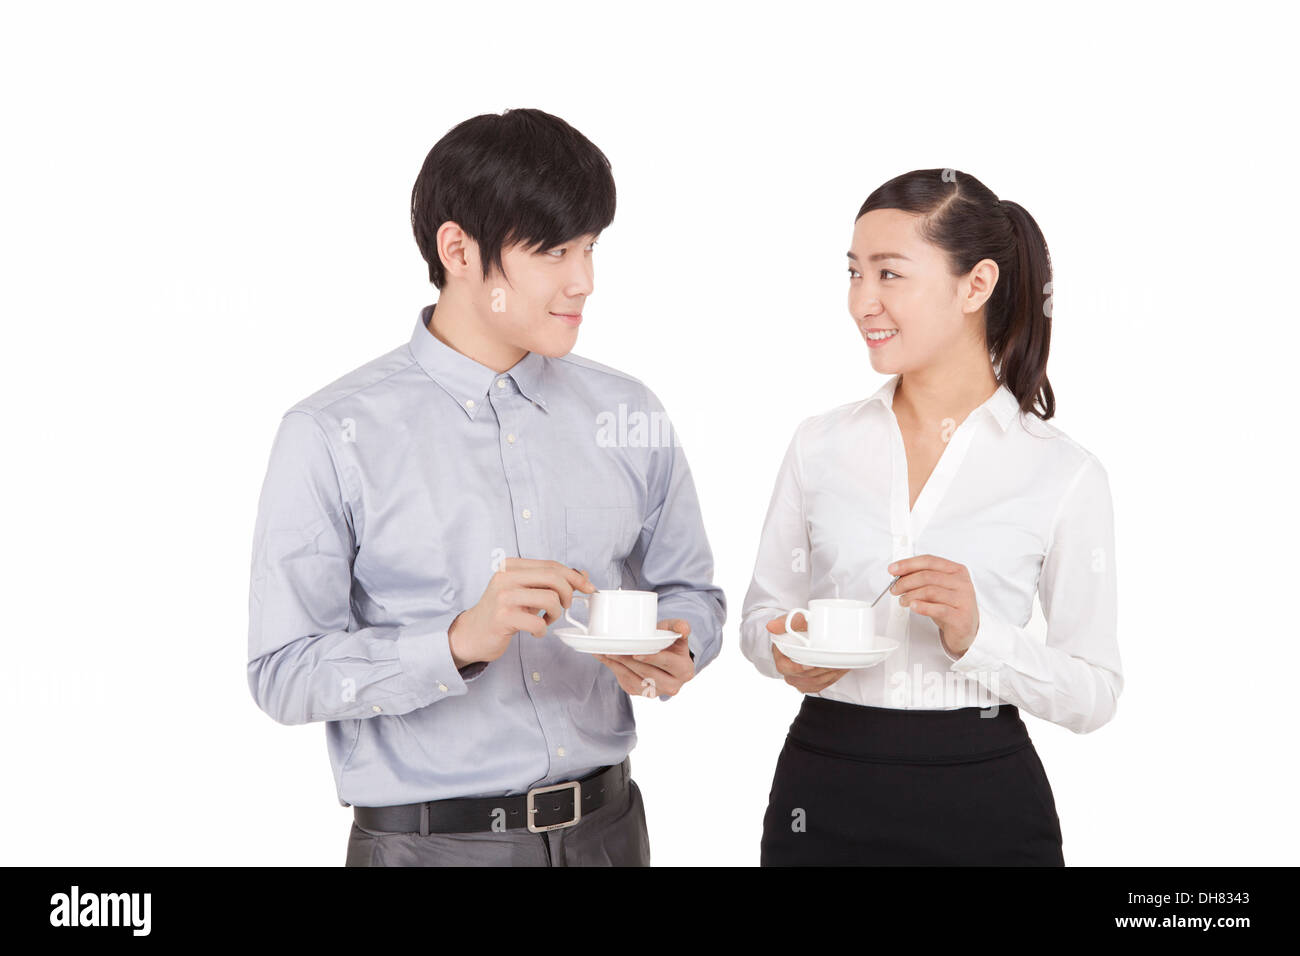 Business people drinking coffee Stock Photo